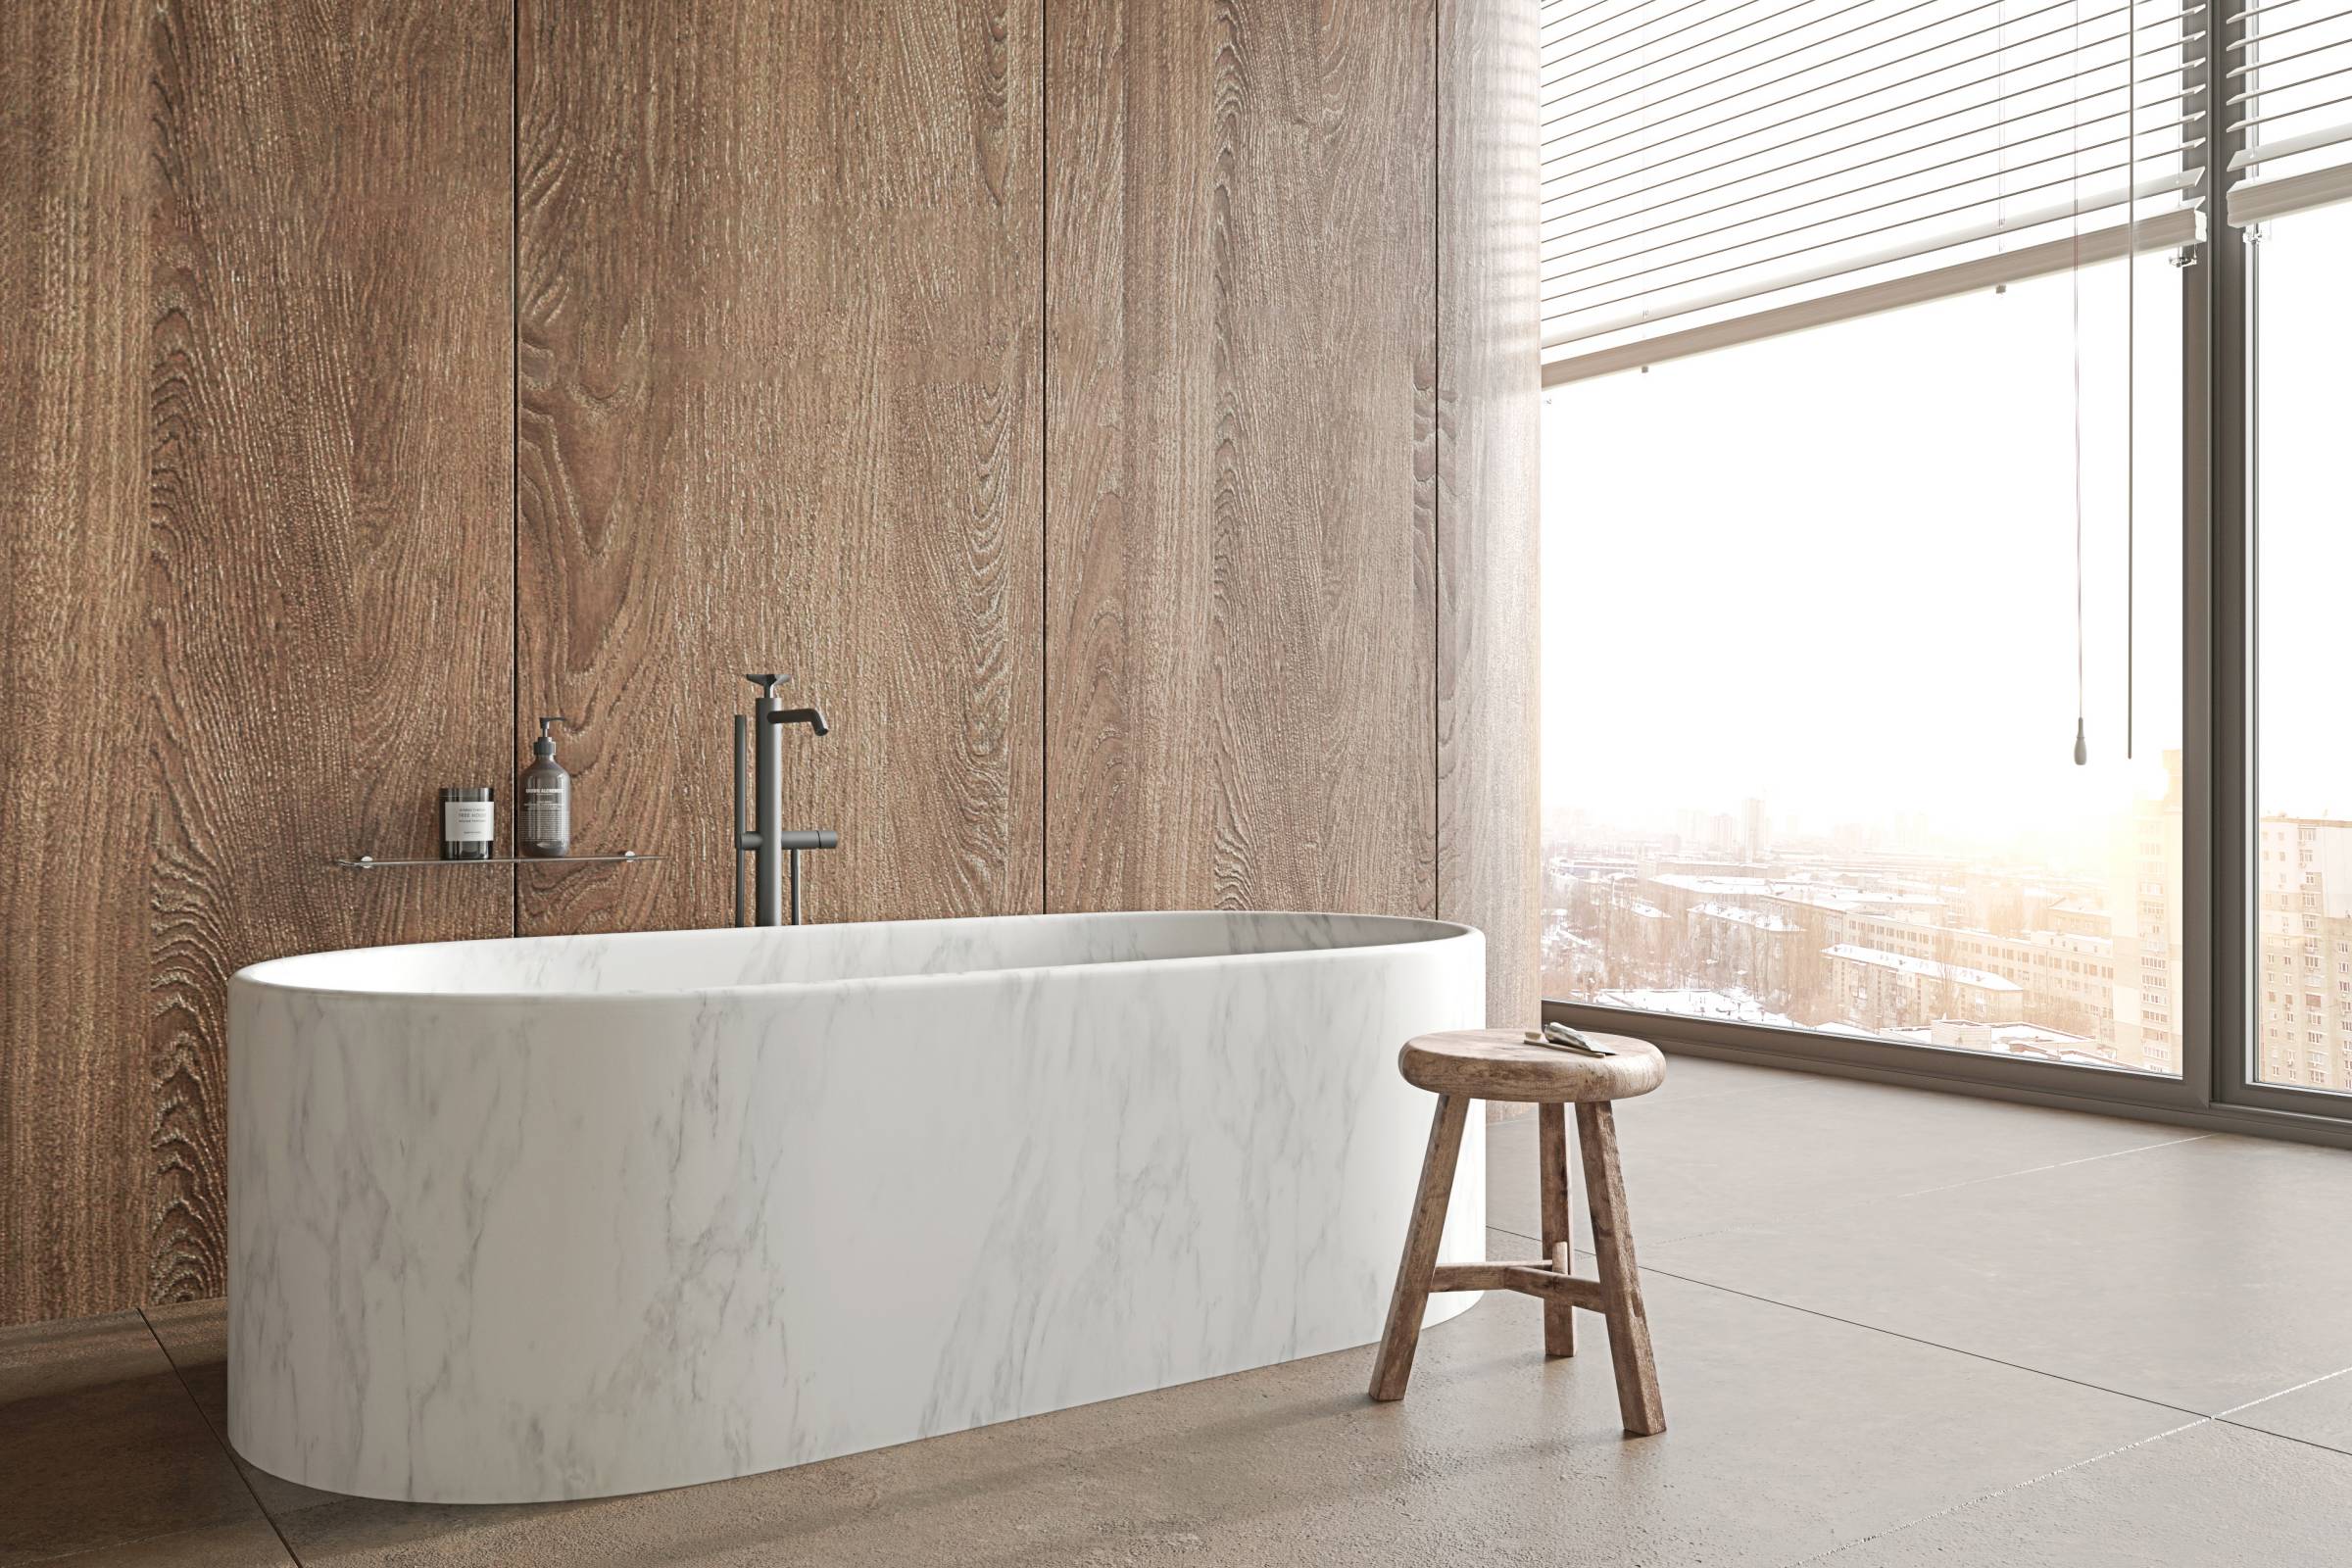 a new bathtub made of marble